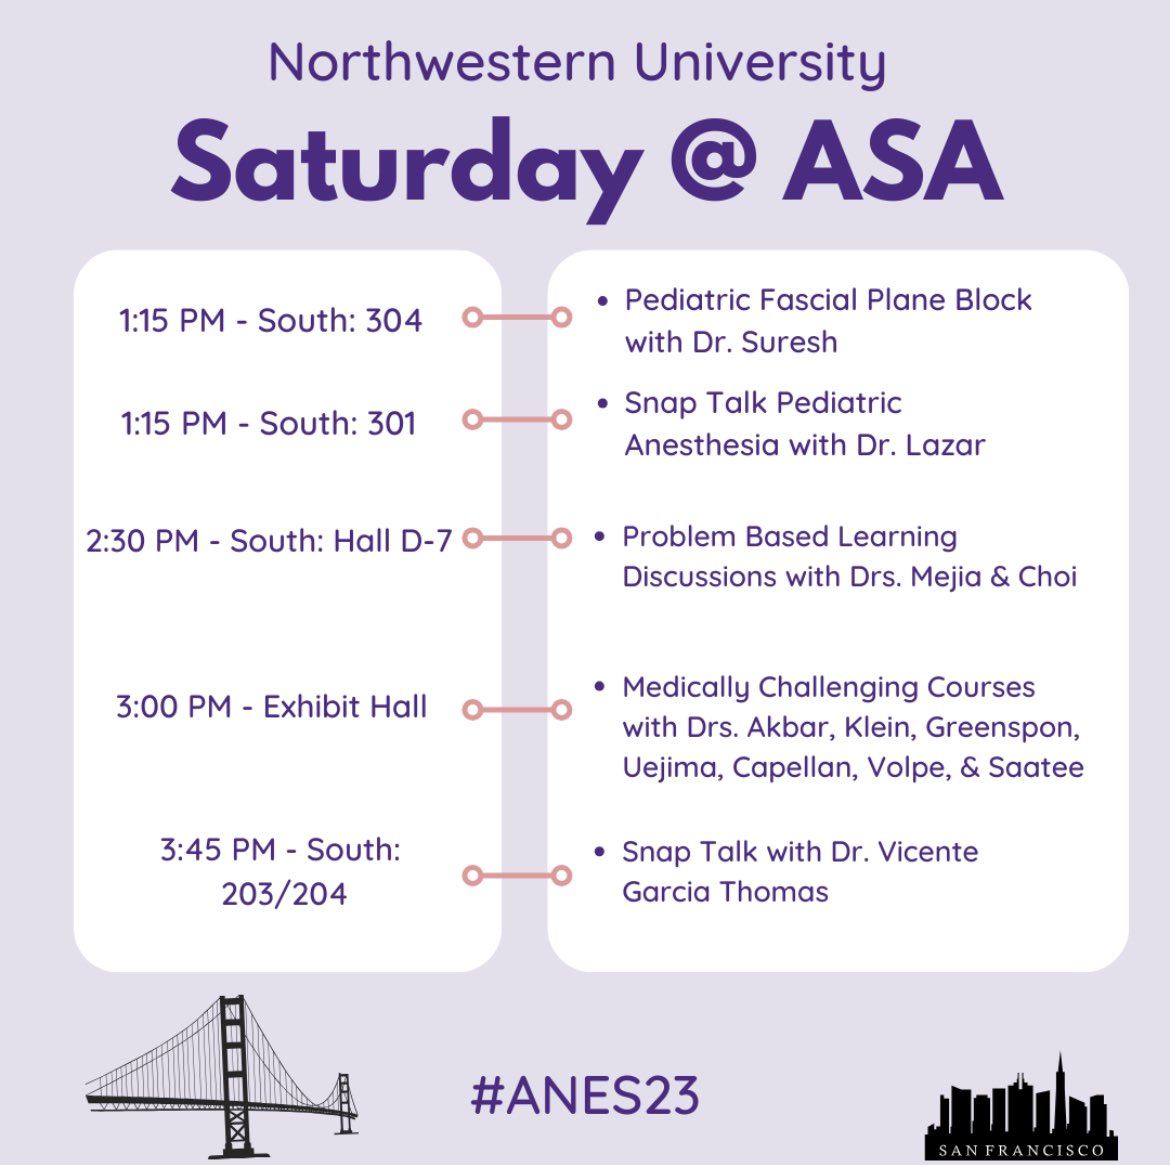 Keep up to speed this weekend with the Northwestern Department of Anesthesiology at the #anes23 conference in San Francisco! Here's where our residents, fellows, and faculty will be today. Come check us out! @asa_hq @northwesternmedicine @nuanesthesiares